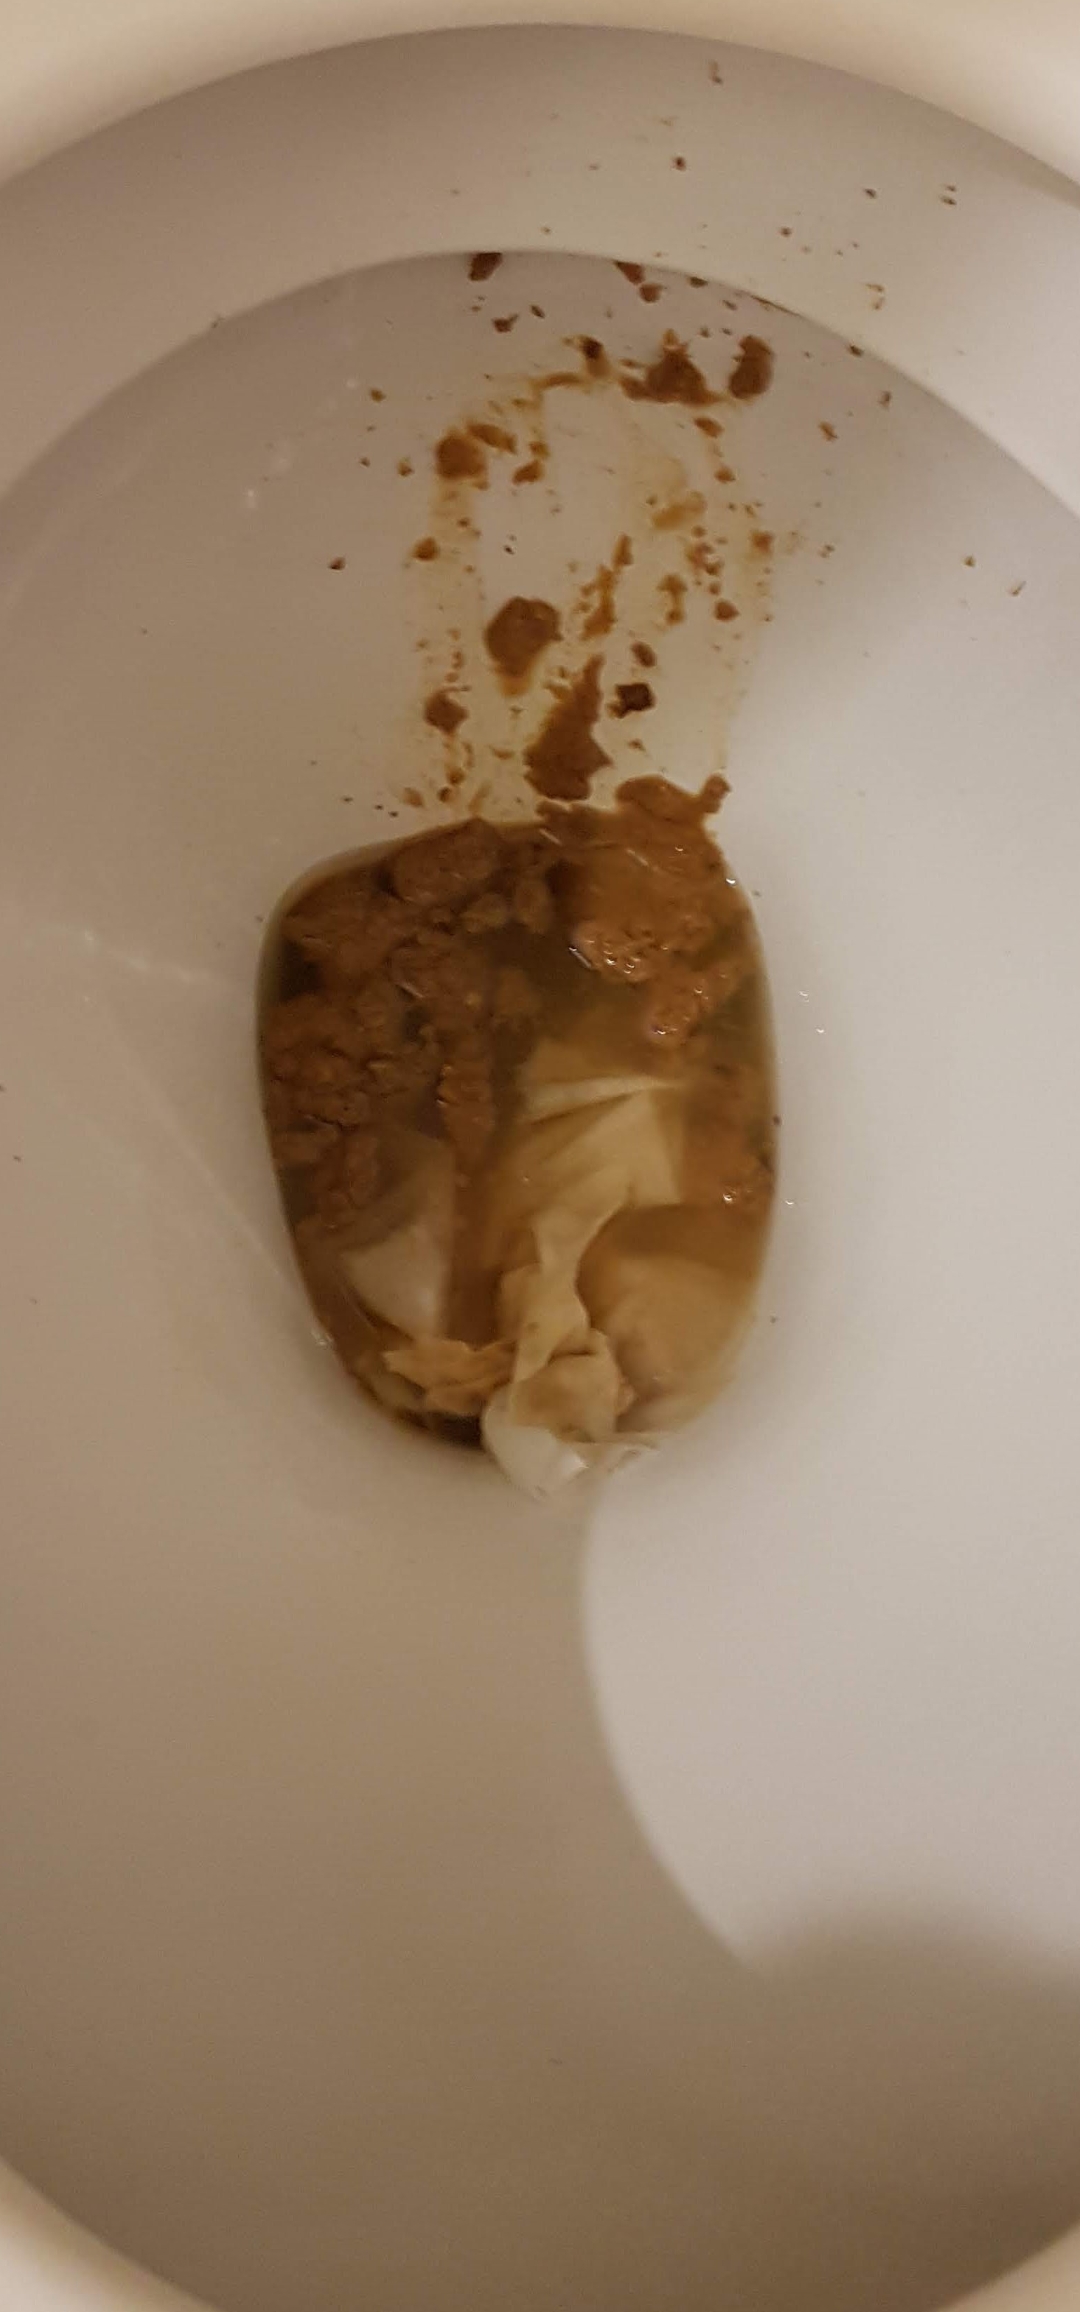 Very early morning loose shit on my mates loo after kebabs